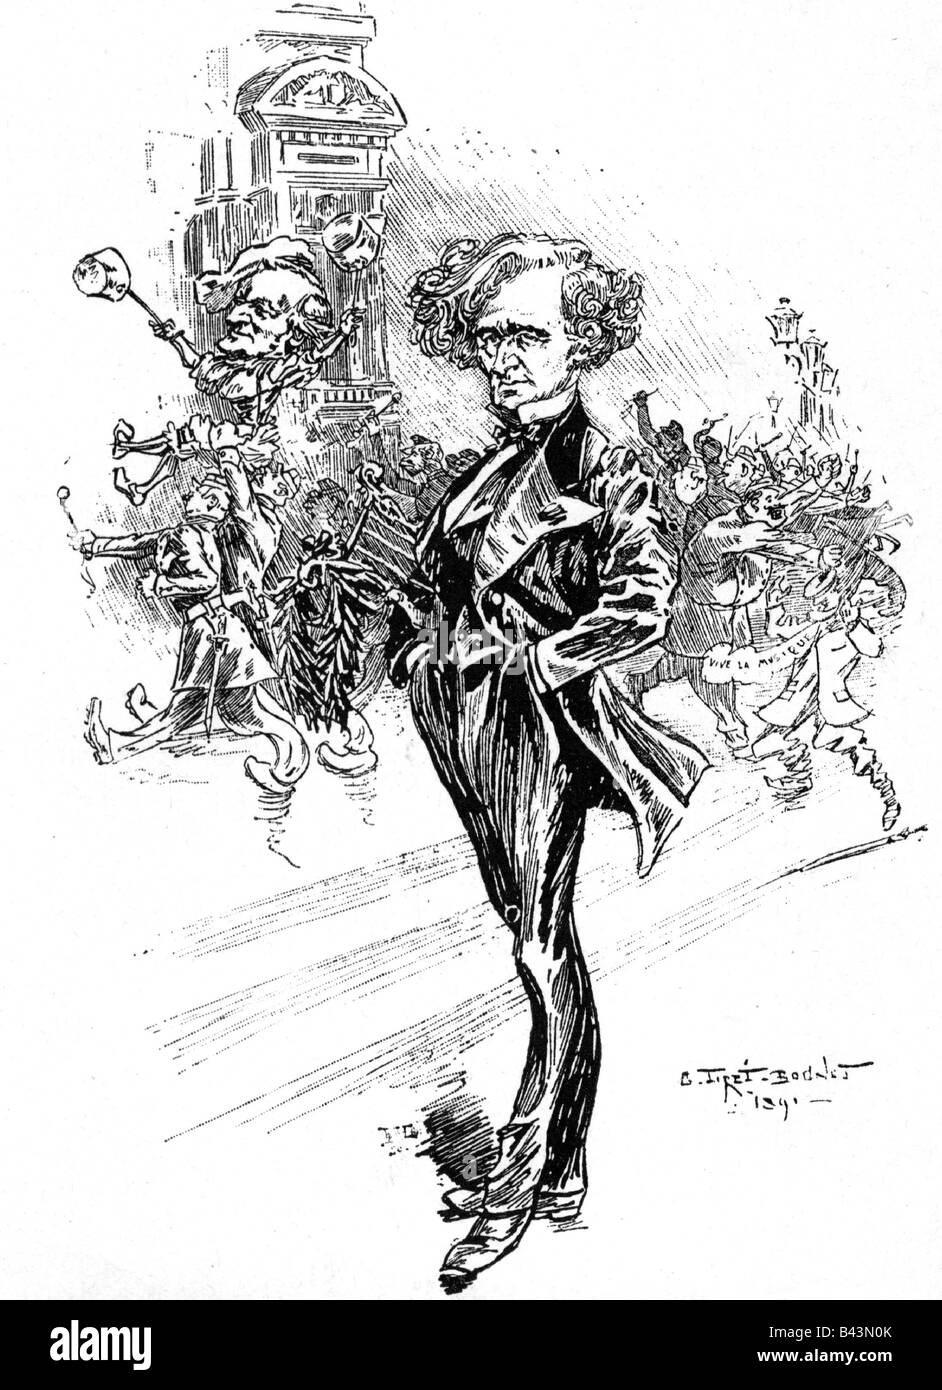 Berlioz, Hector Louis, 11.12.1803 - 8.3.1869, French composer, drawing, caricature by Tiret-Bognet, Illustration to J. Grand-Carteret, 1891, Stock Photo